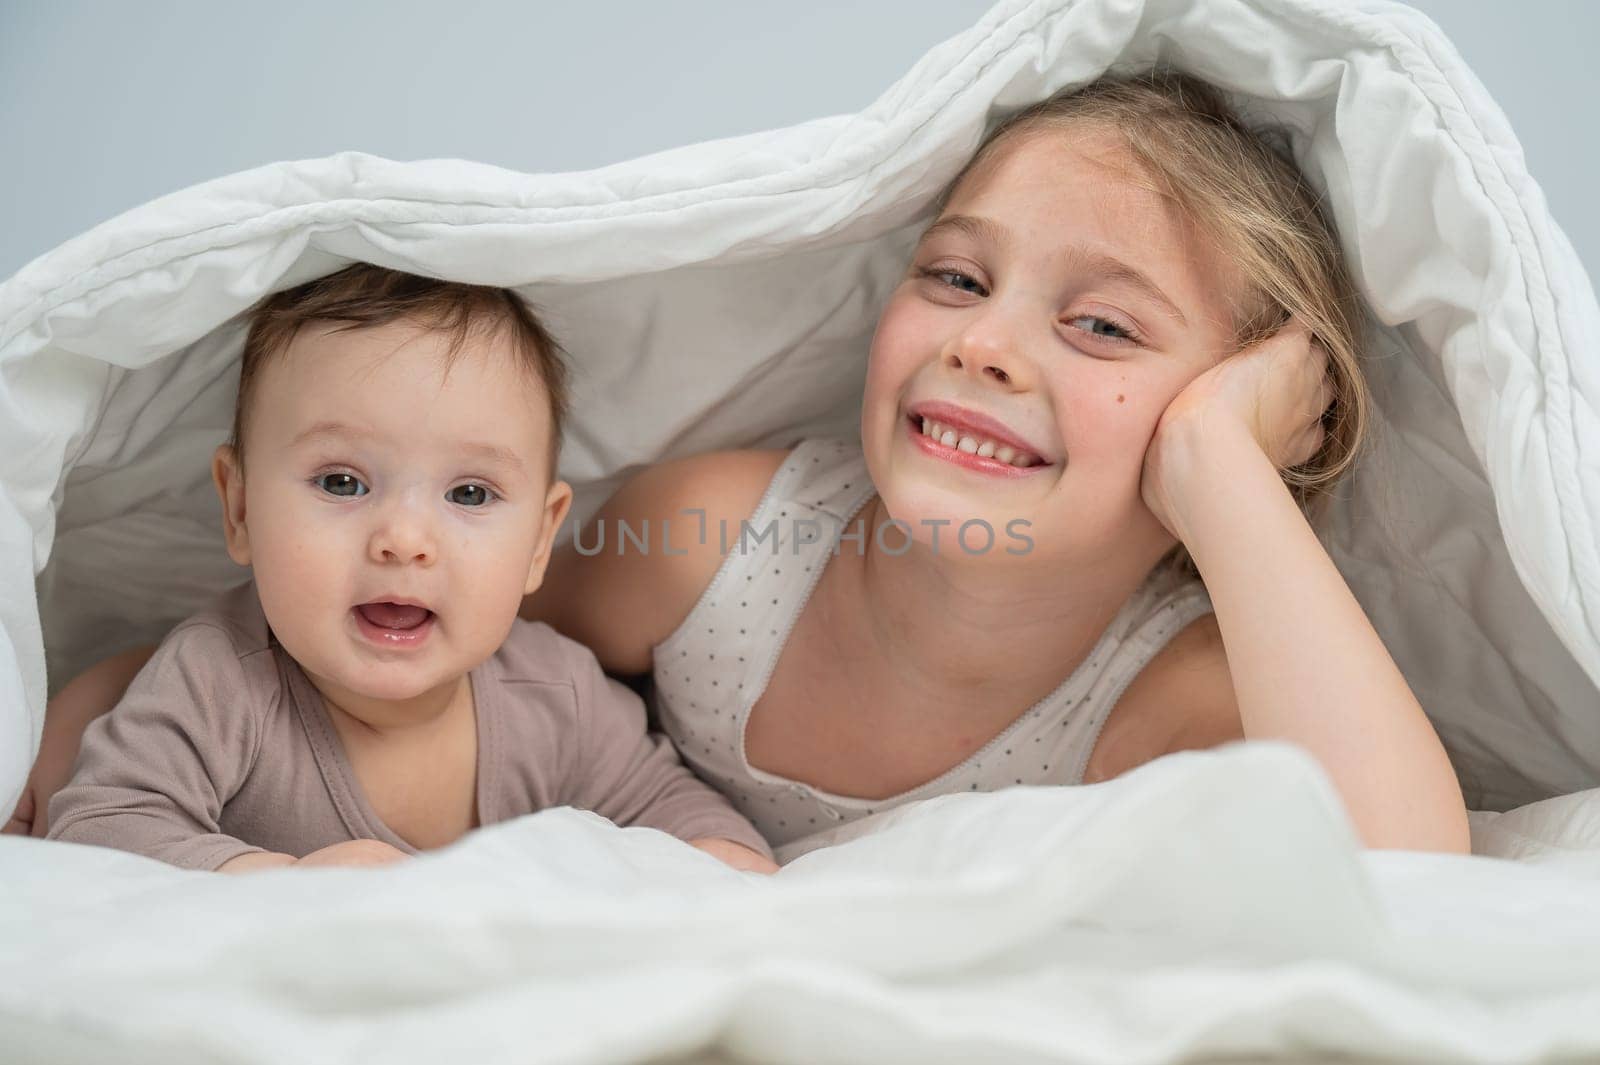 Little girl and her newborn brother hiding under the blanket